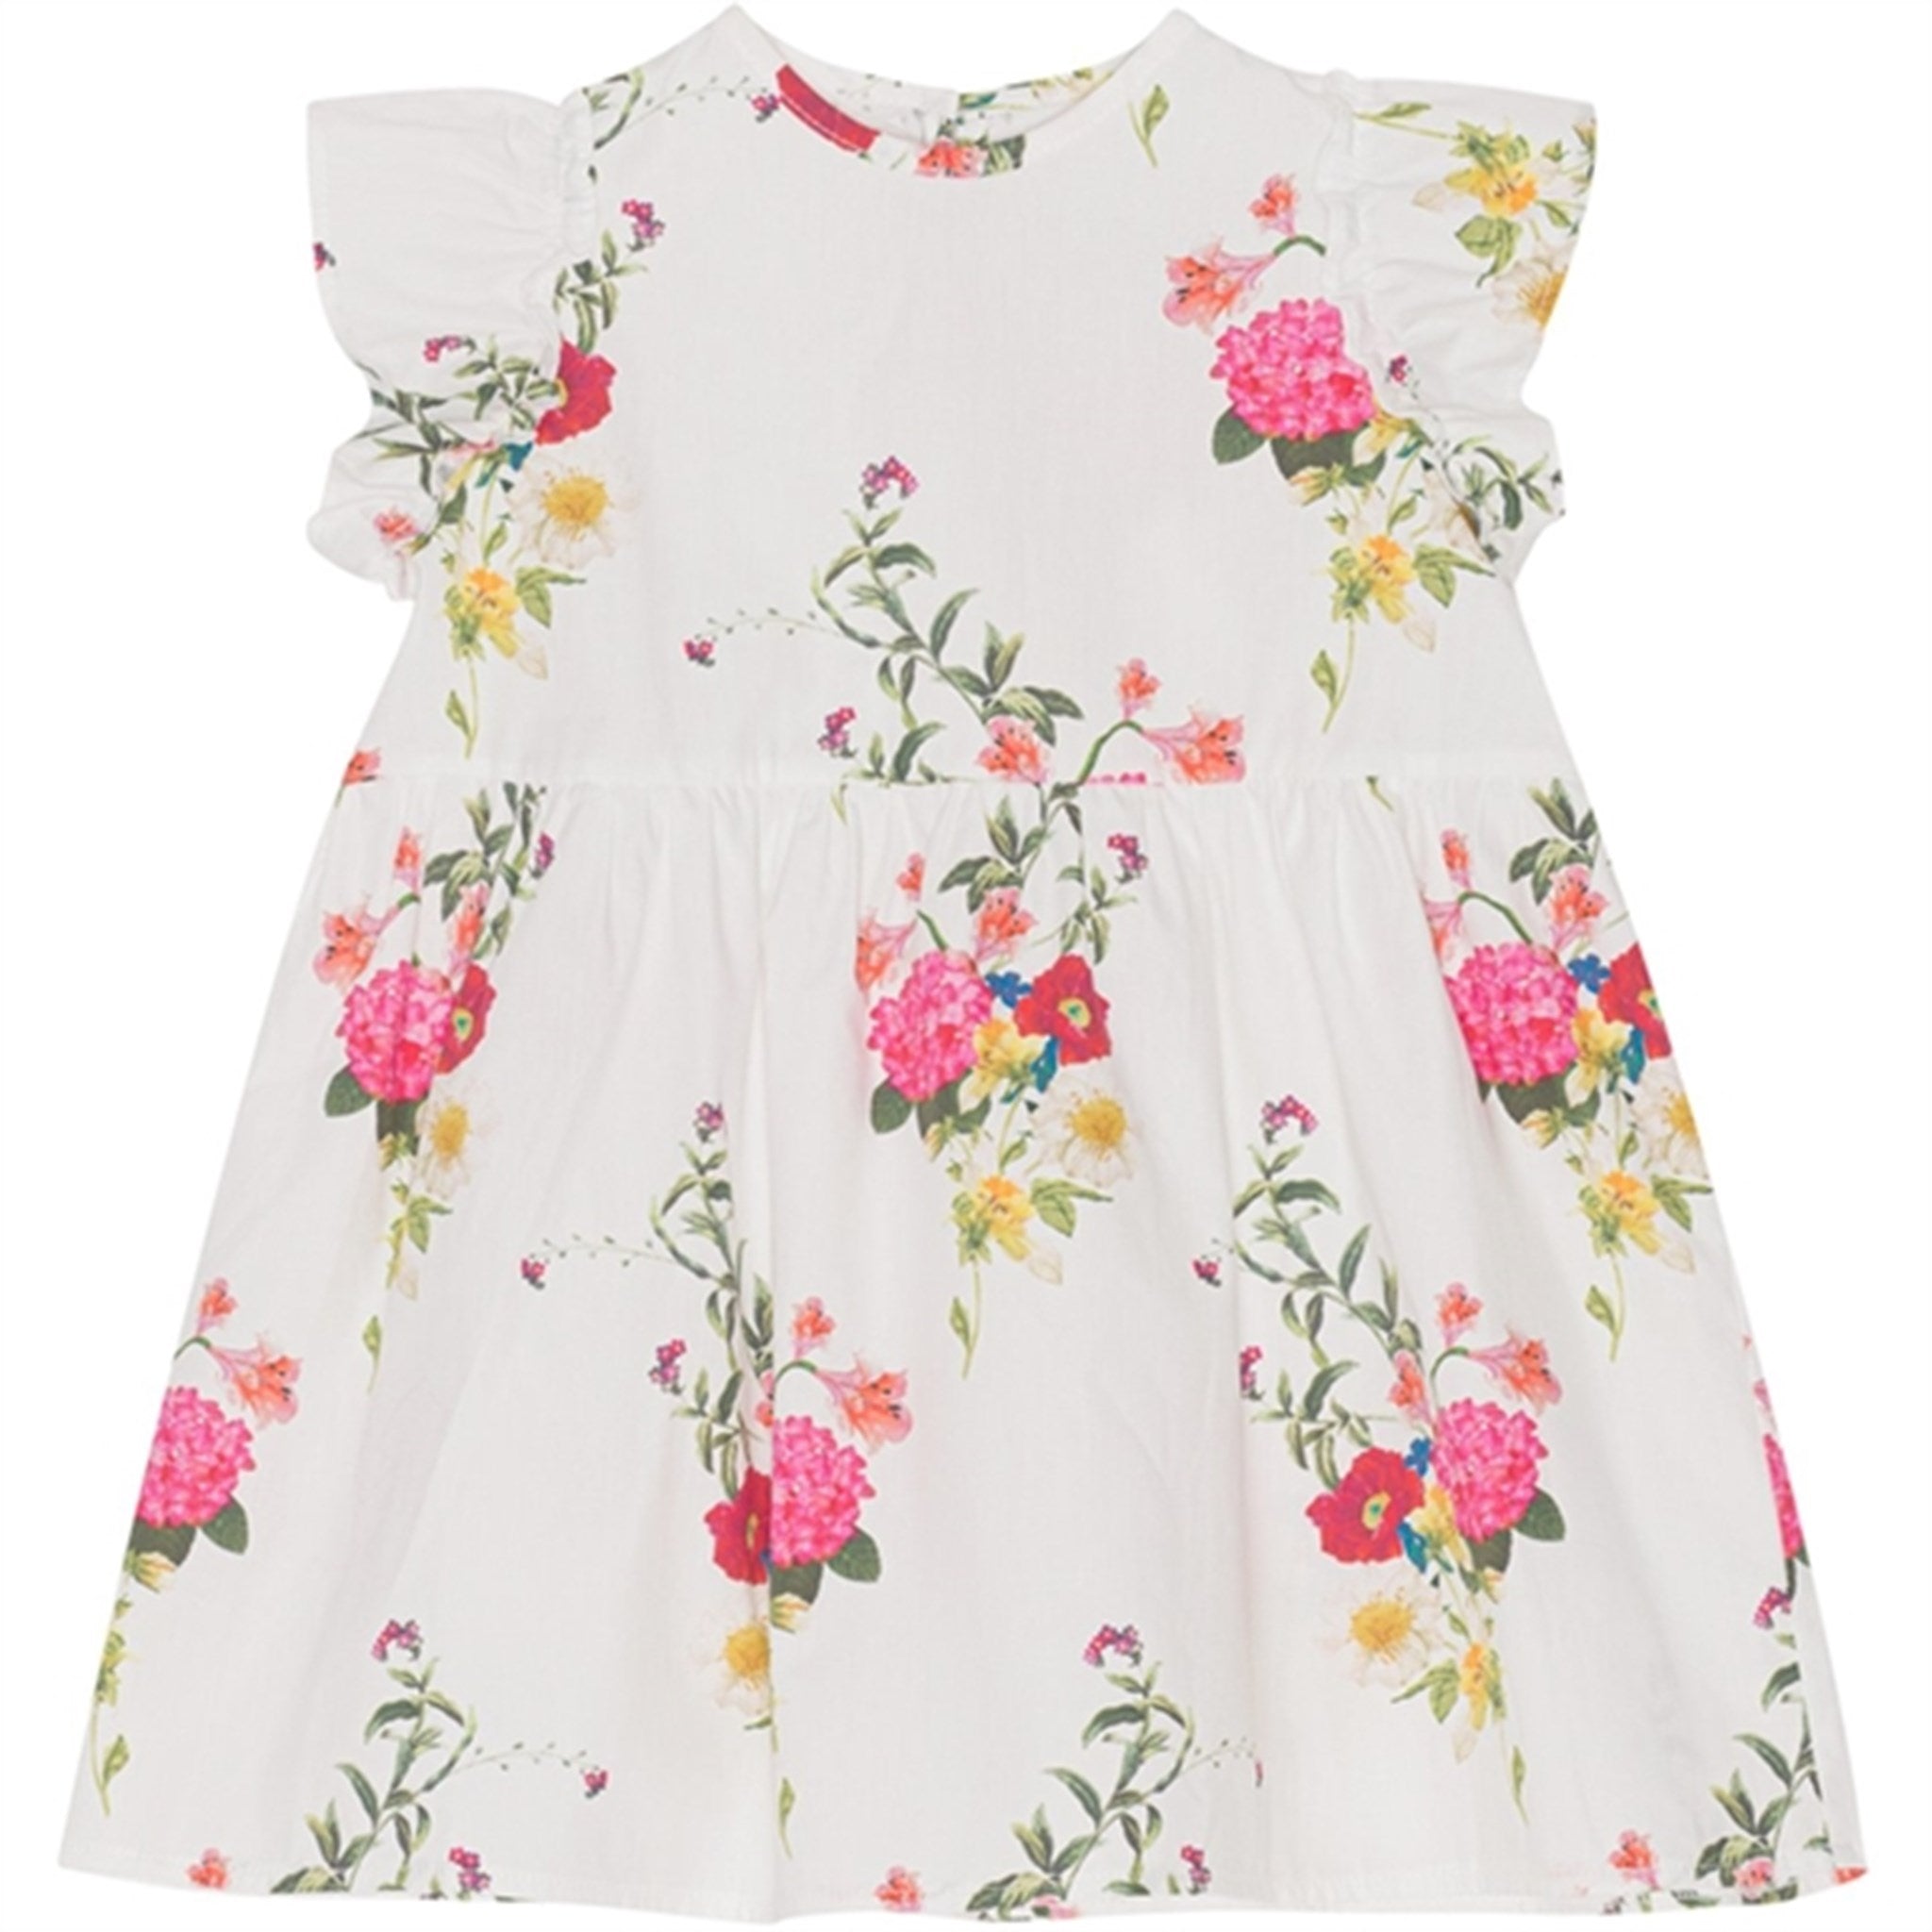 Christina Rohde 841 Dress Lovely White Floral